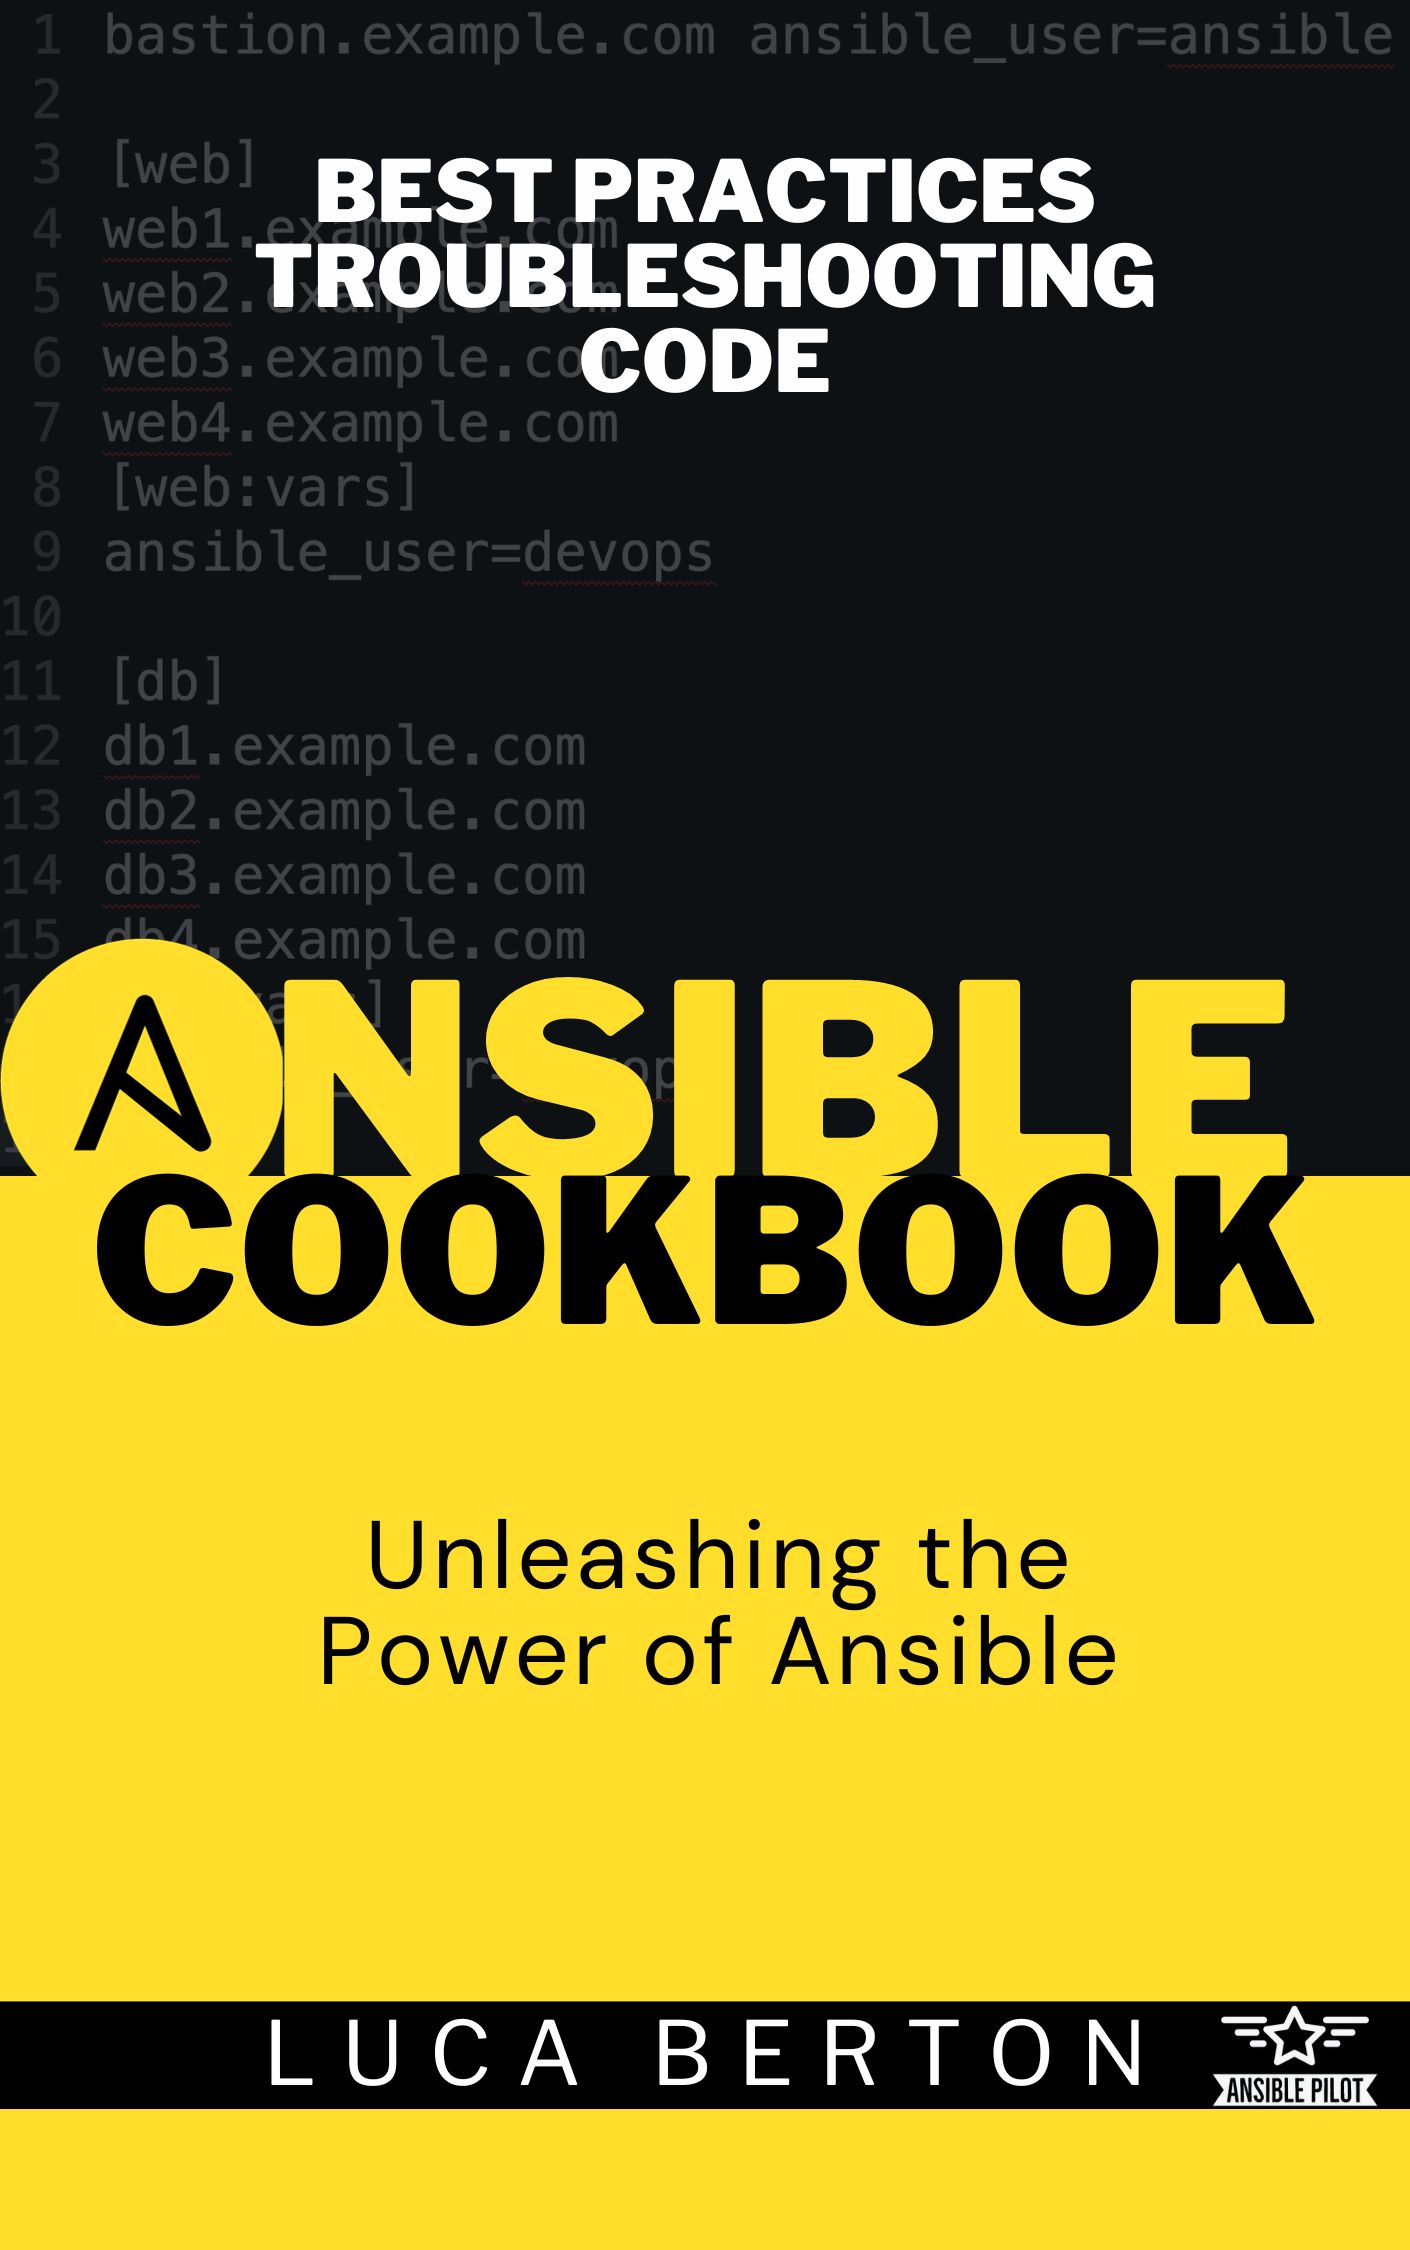 Ansible Cookbook: A Comprehensive Guide to Unleashing the Power of Ansible via Best Practices, Troubleshooting, and Linting Rules with Luca Berton